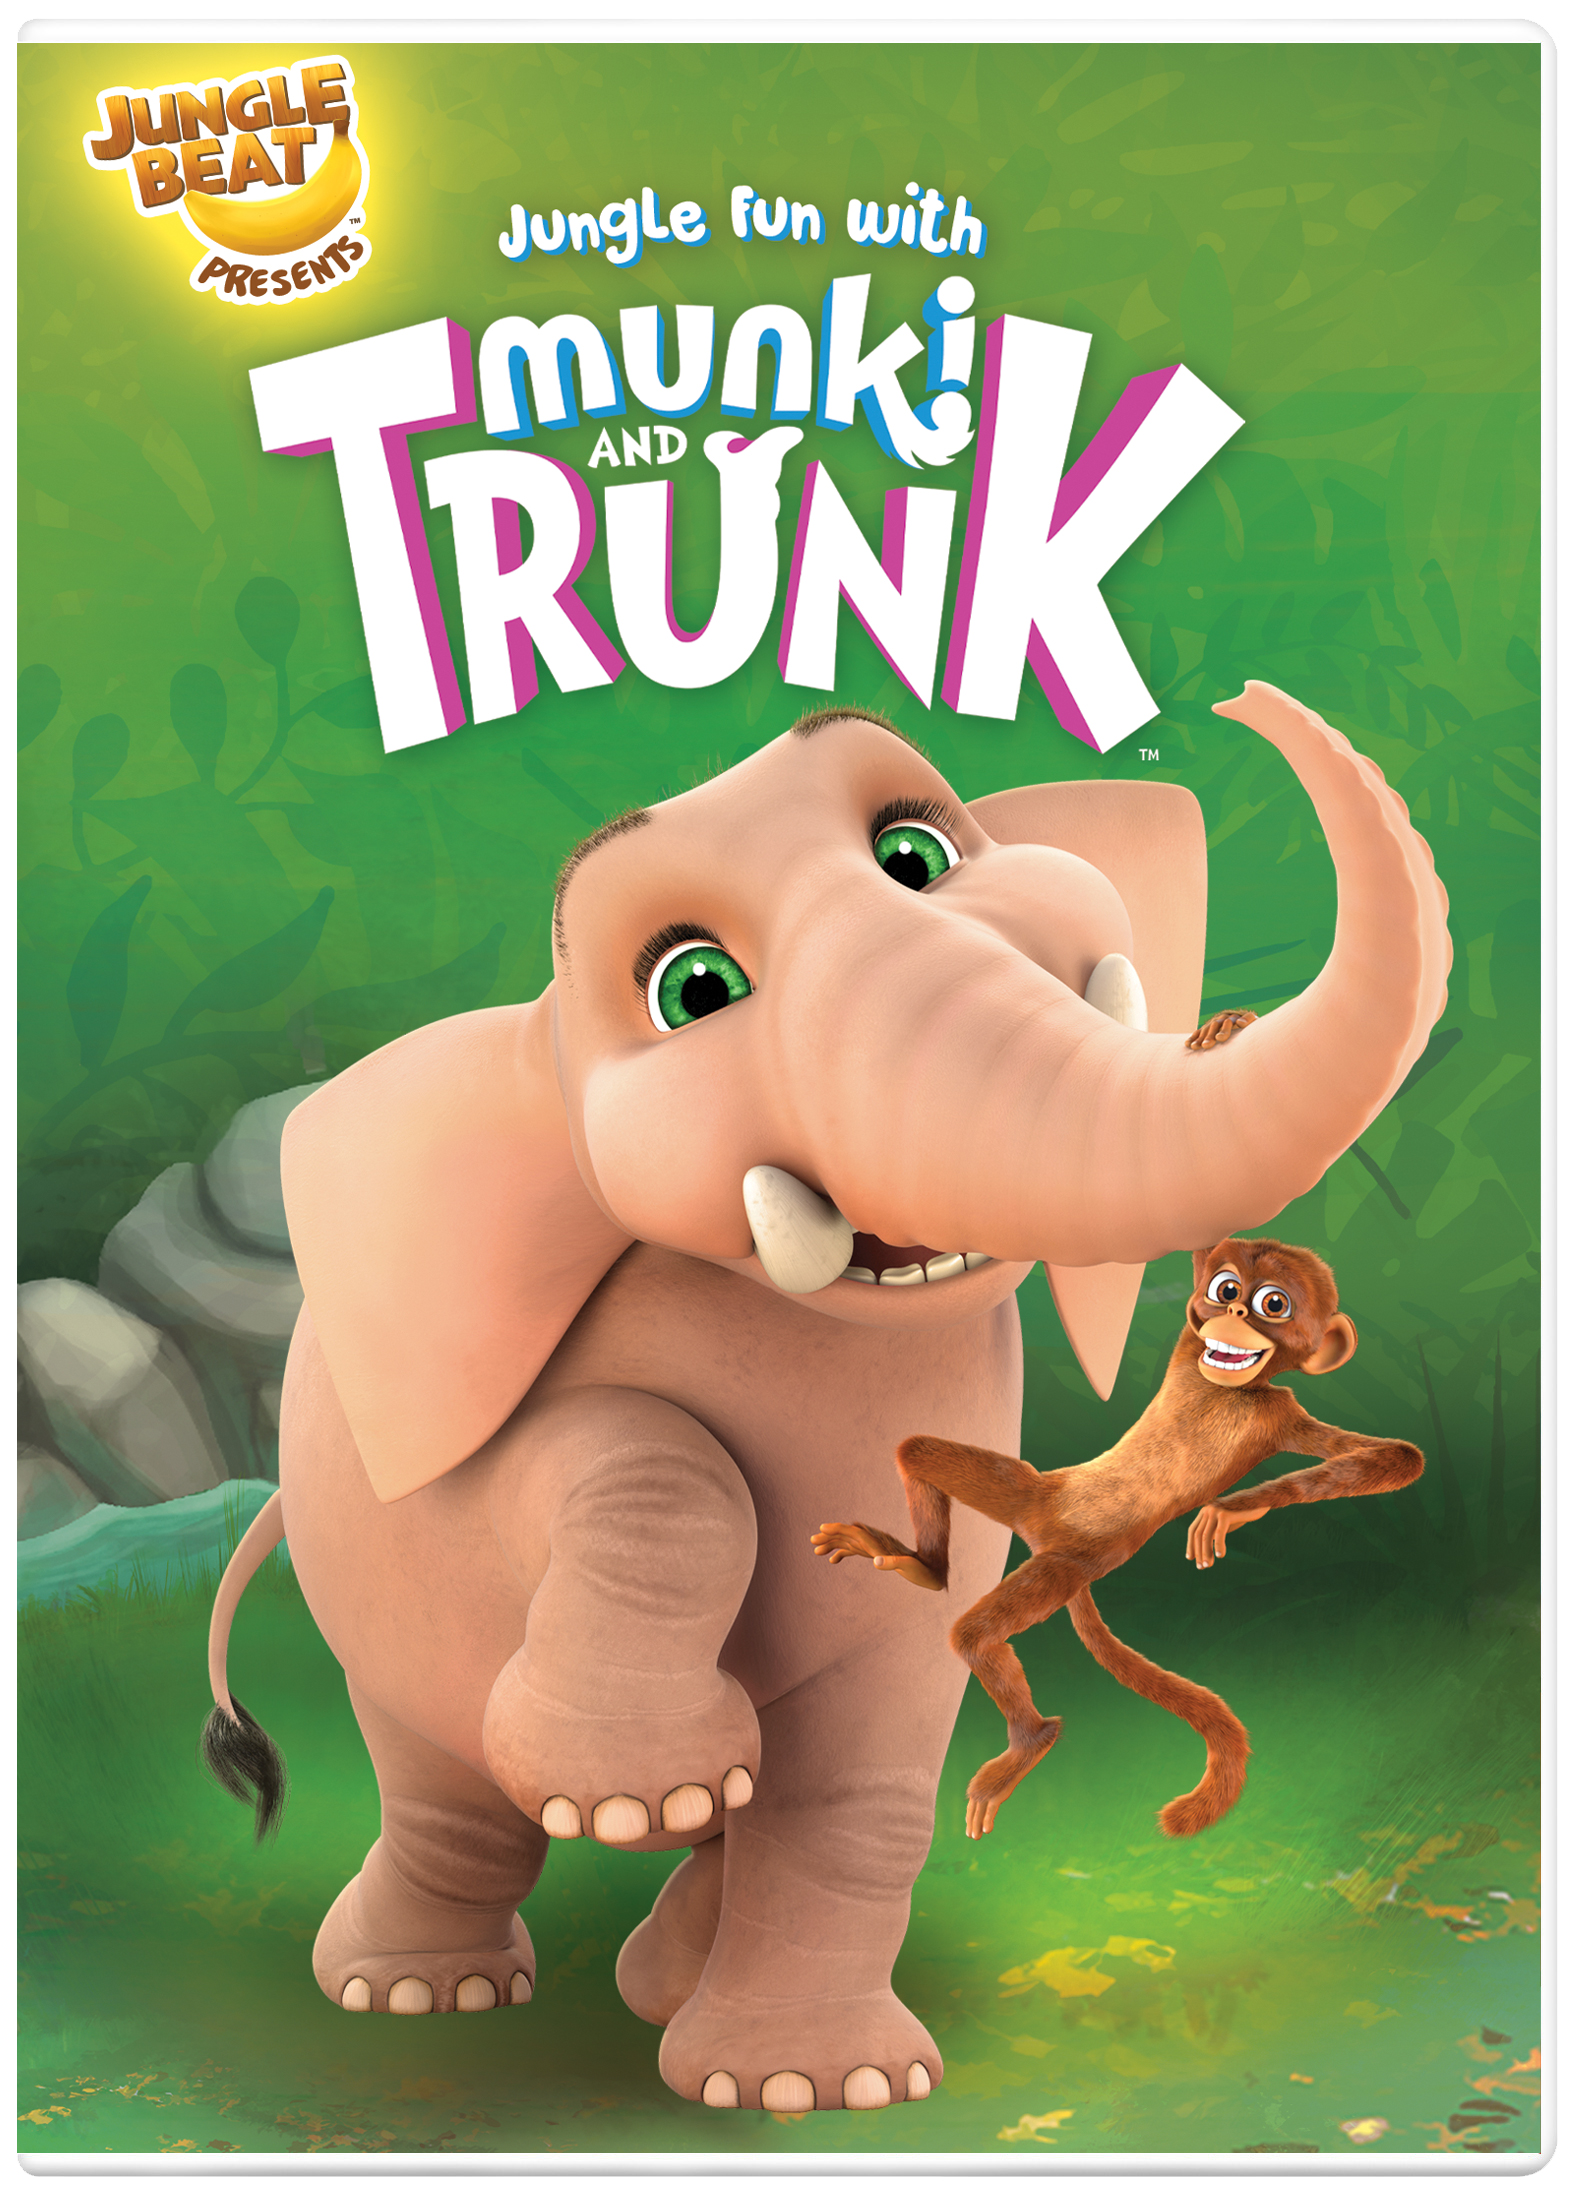 Jungle Fun with Munki and Trunk * Adorable selection of stories that  teaches lessons about nature and friendship | VoiceAmerica Press Blog |  Internet Talk Radio News